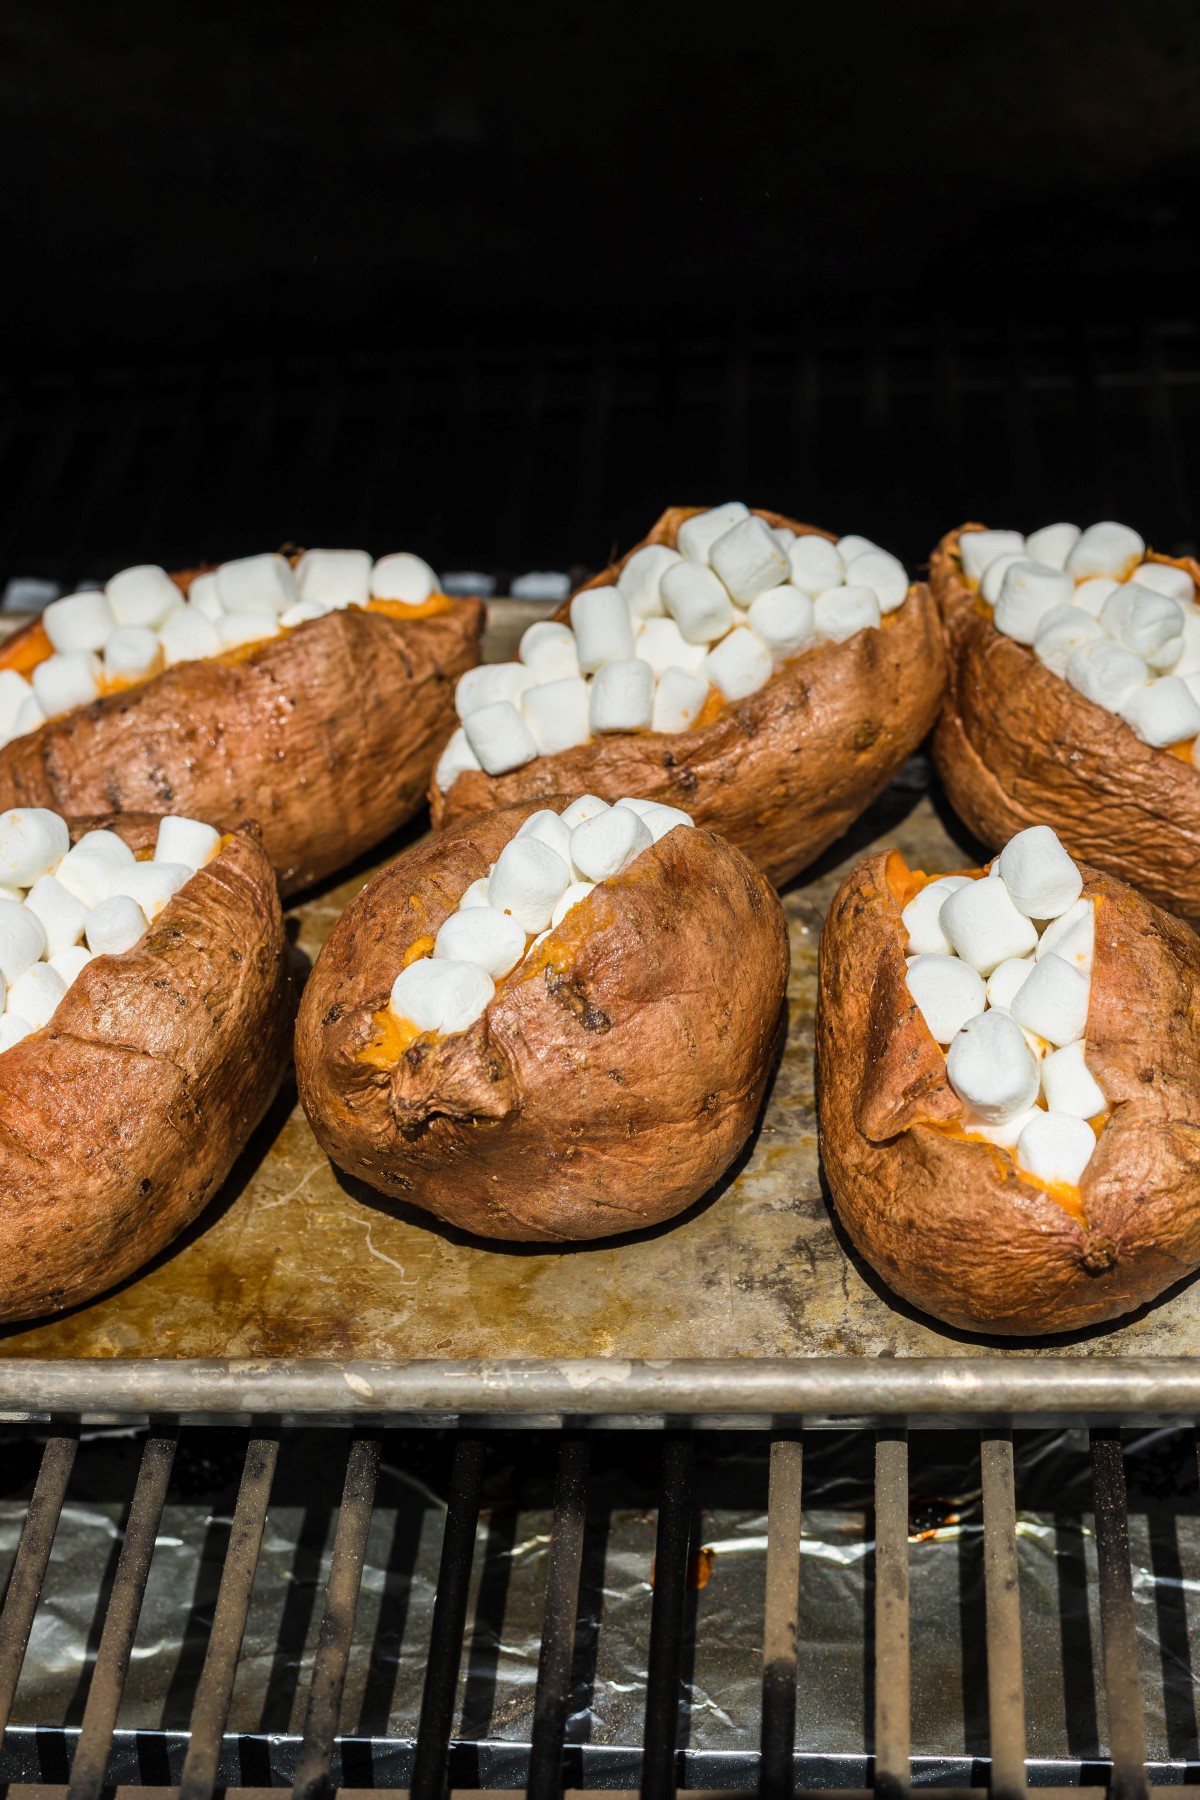 Sweet potatoes filled with filling and topped with mini marshmallows going back into the smoker for a little more smoky flavor.